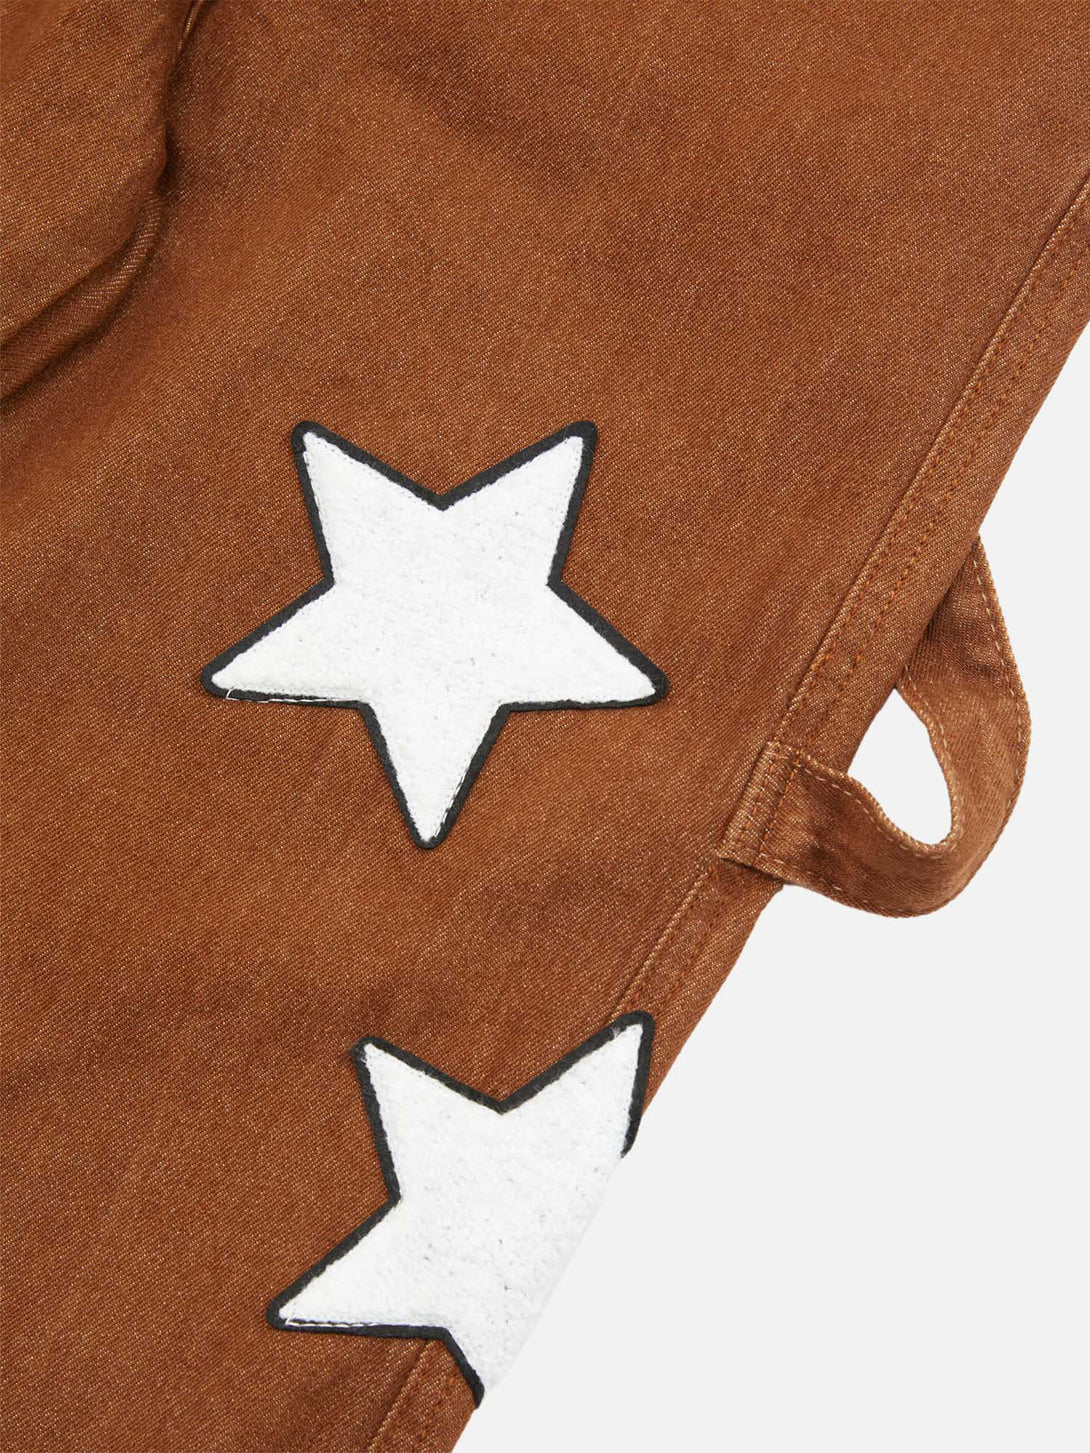 Majesda® - American Retro Embroidered Five-pointed Star Jeans- Outfit Ideas - Streetwear Fashion - majesda.com